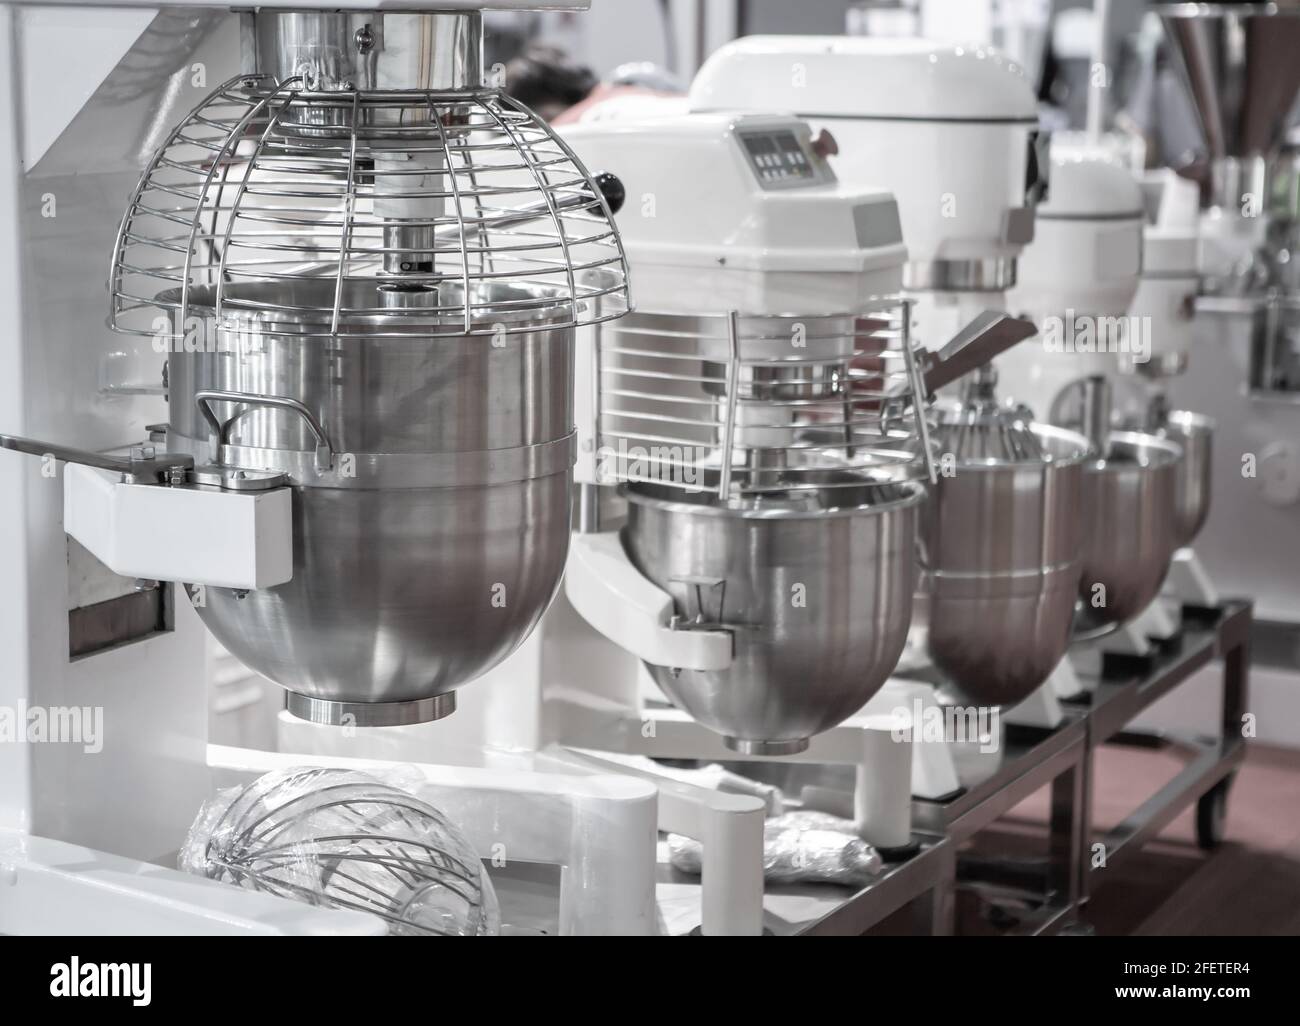 https://c8.alamy.com/comp/2FETER4/close-up-of-commercial-bread-mixer-food-mixing-machine-for-food-industry-2FETER4.jpg